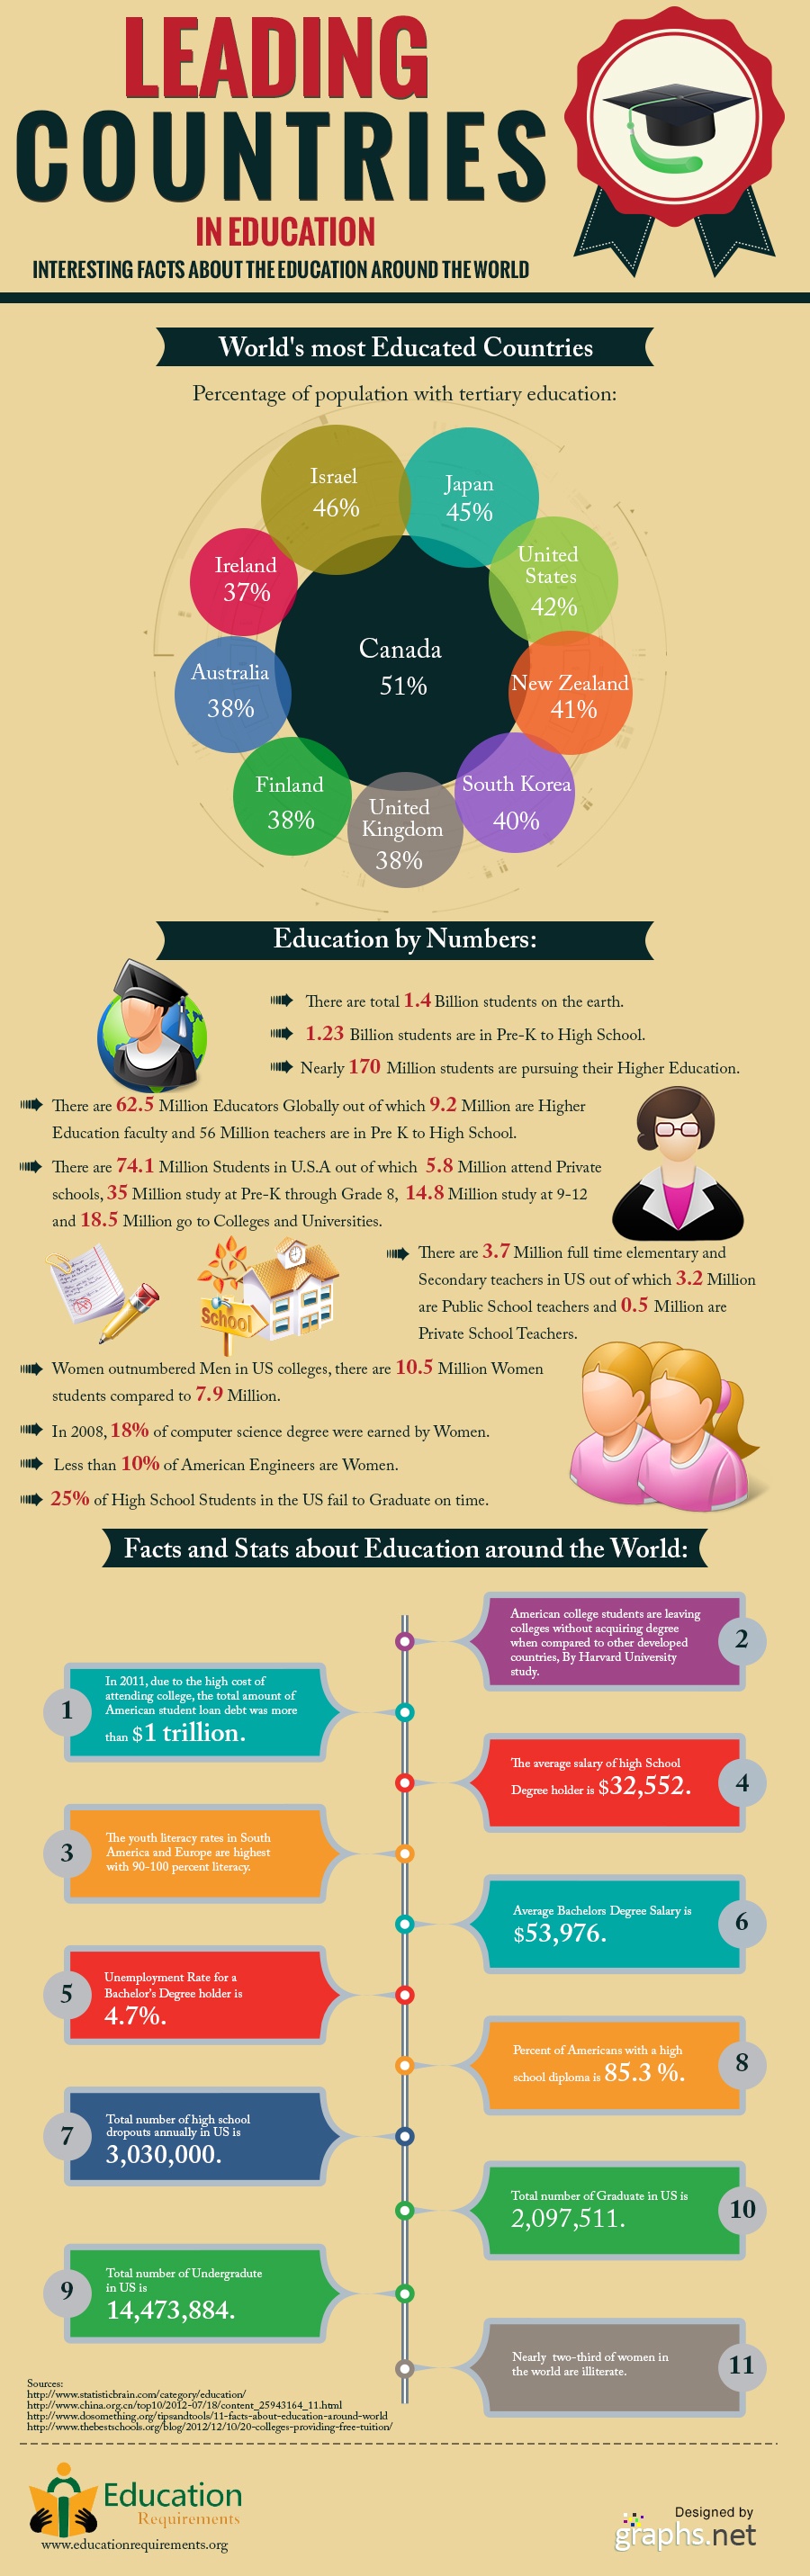 Leading Countries in Education Infographic